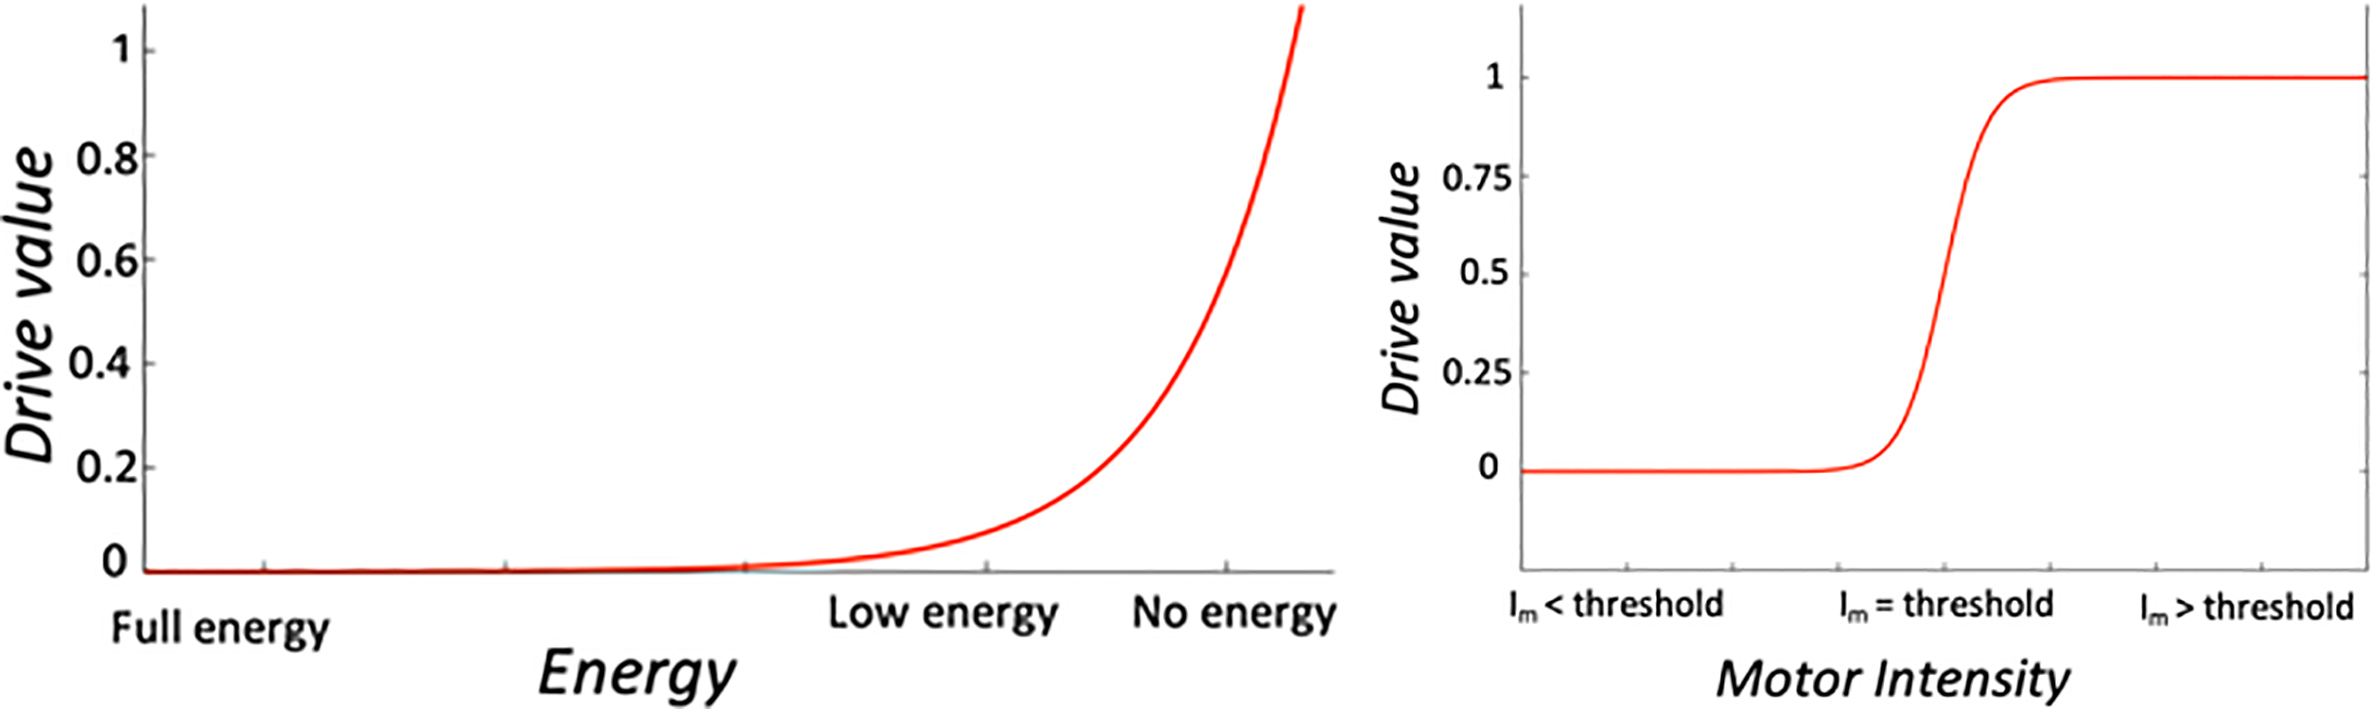 Examples of drive functions. Left: Energy drive represented with a power function Deo⁢p=ab⁢e. Right: Motor Intensity integrity drive, corresponding to Dio⁢p=tanh(aIm).